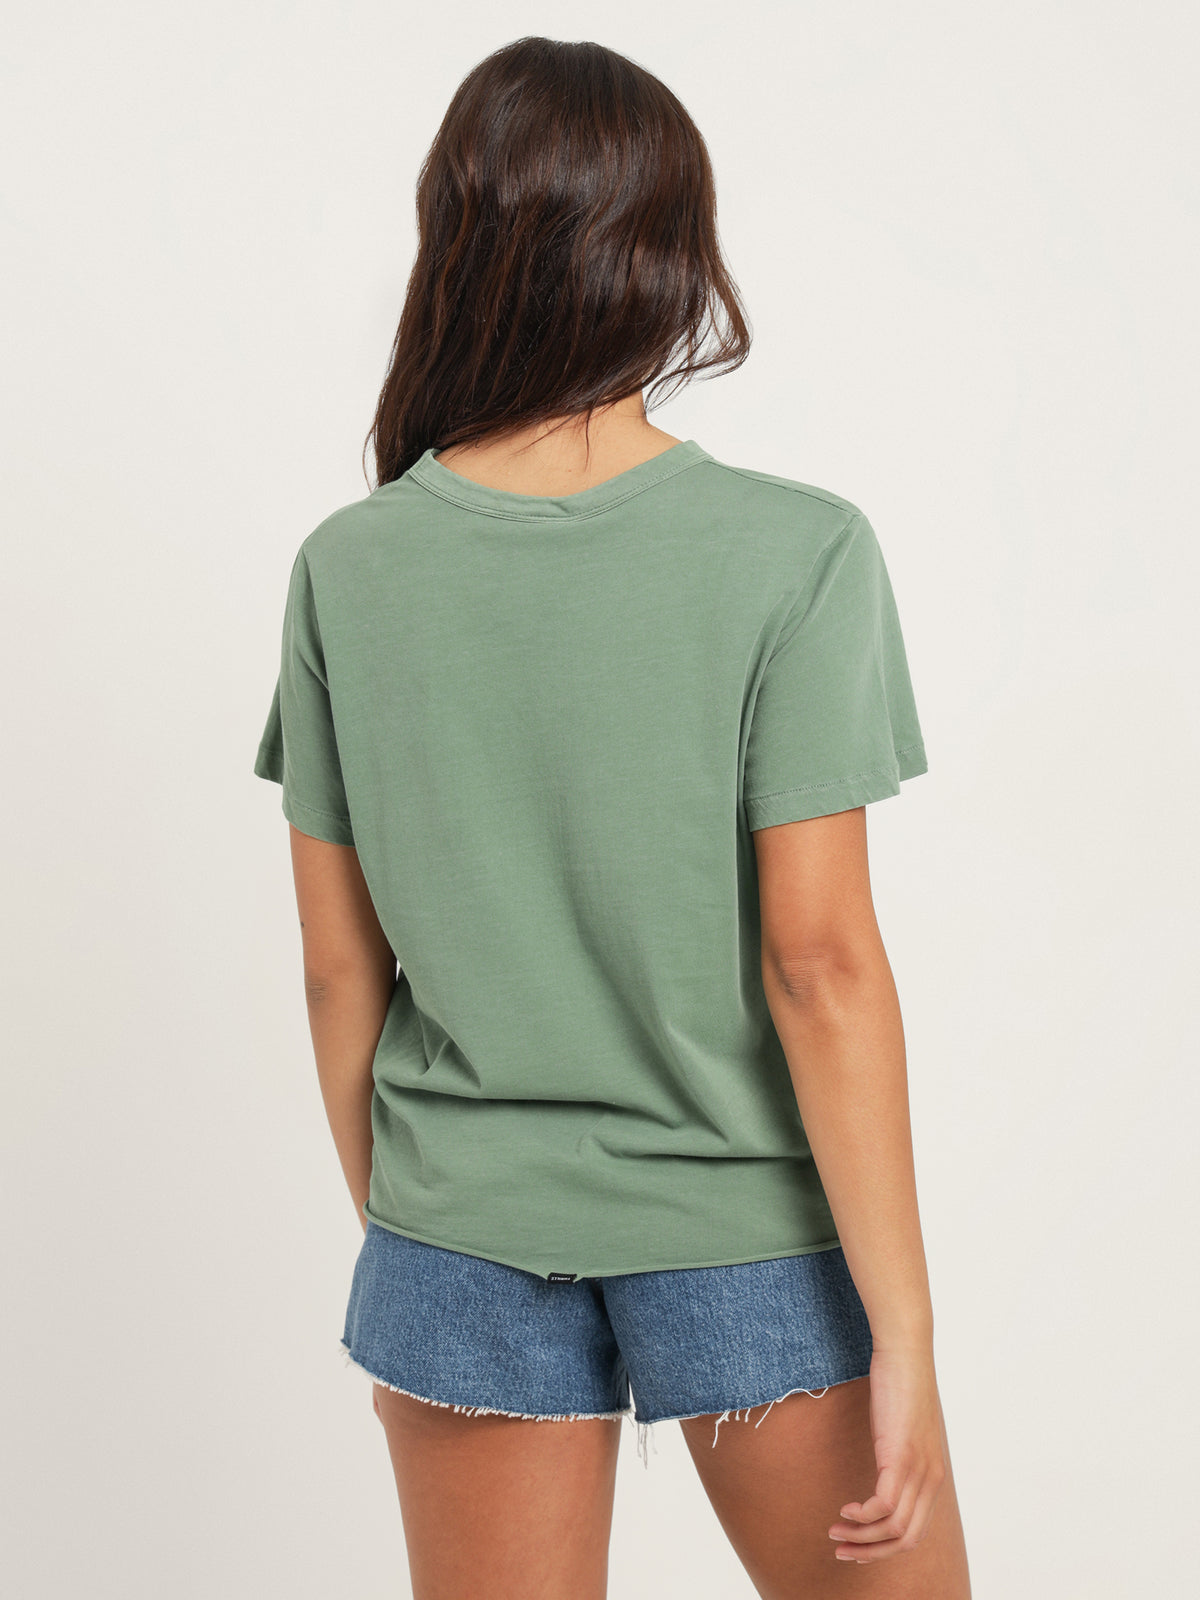 Stack Relaxed Fit T-Shirt in Comfrey Green